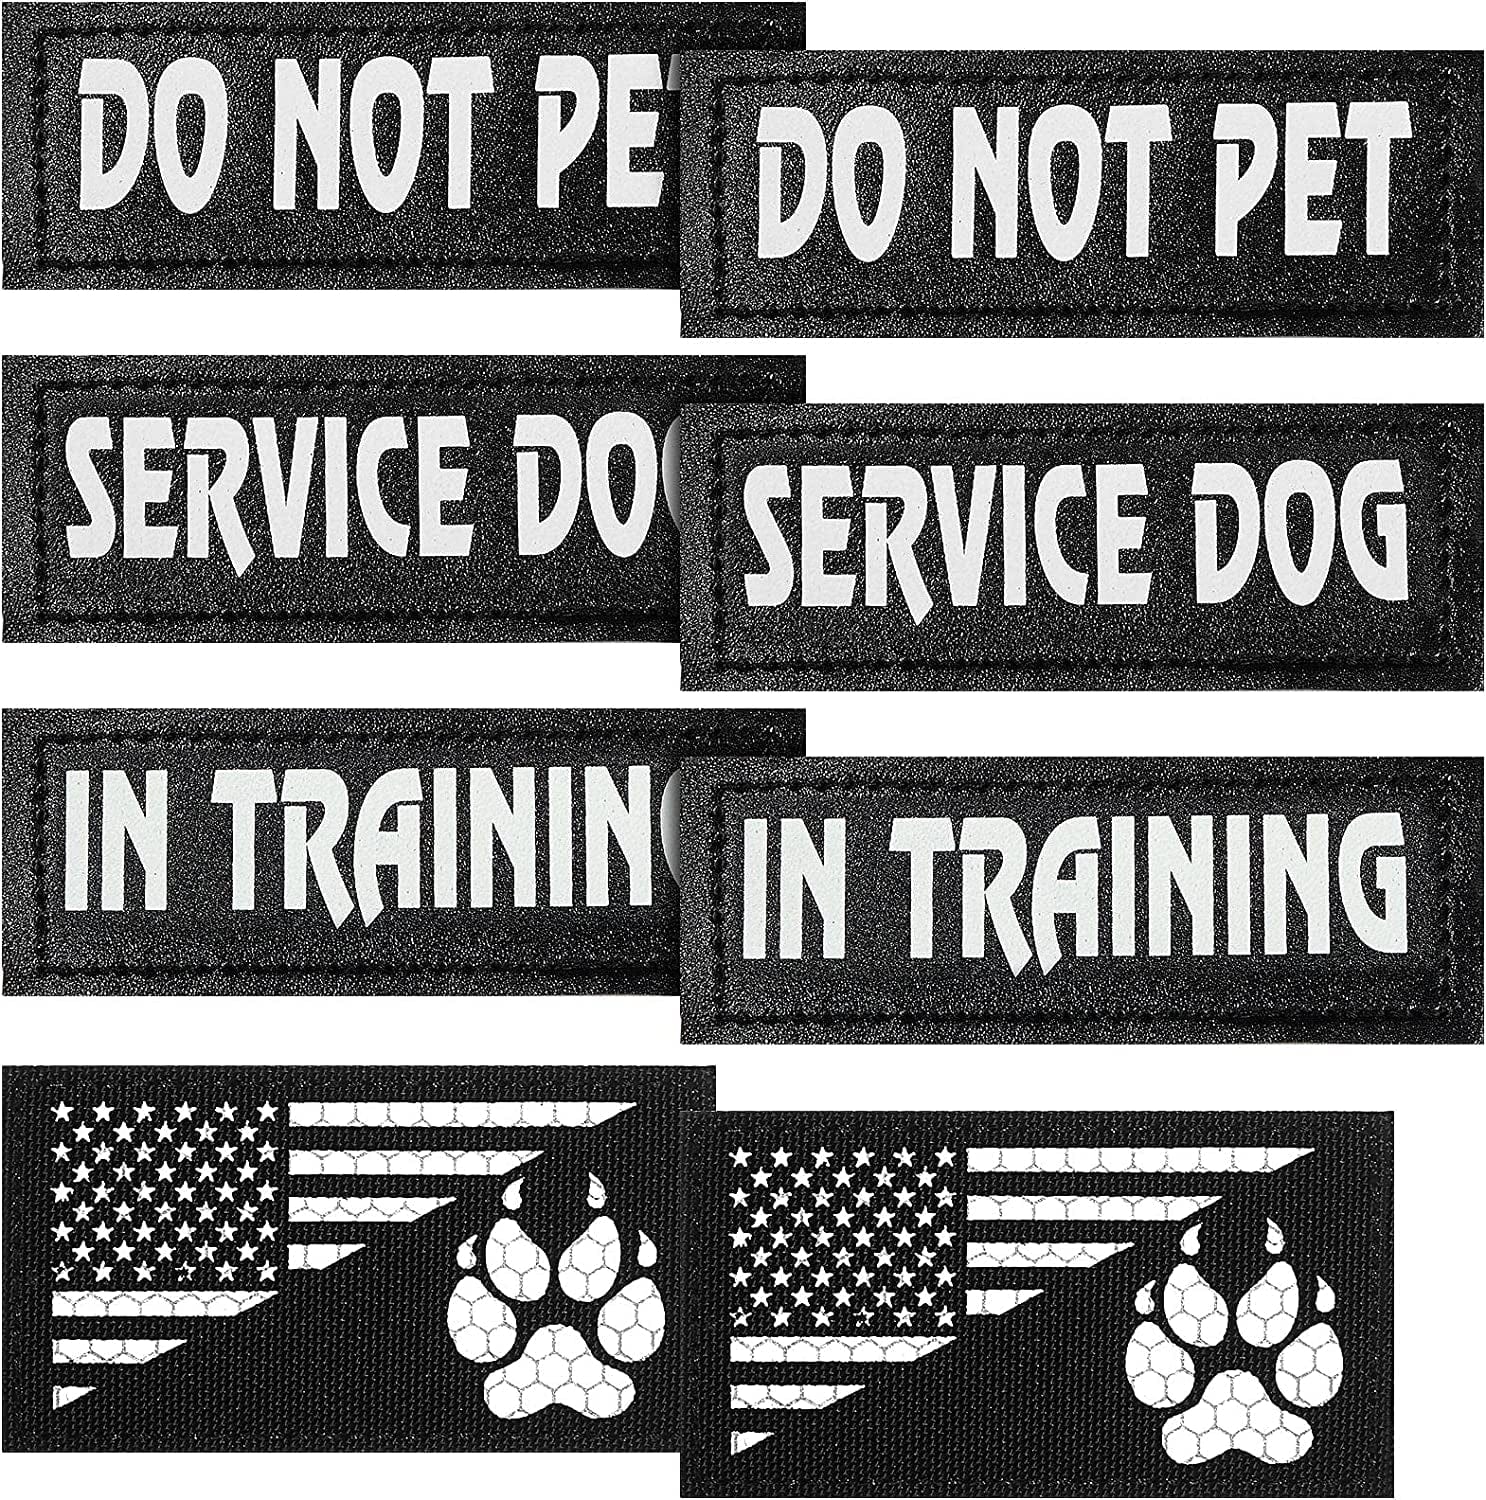 Service Dog Vest Patches, Ask to Pet Patch Set in 3 Designs (6 Pack)